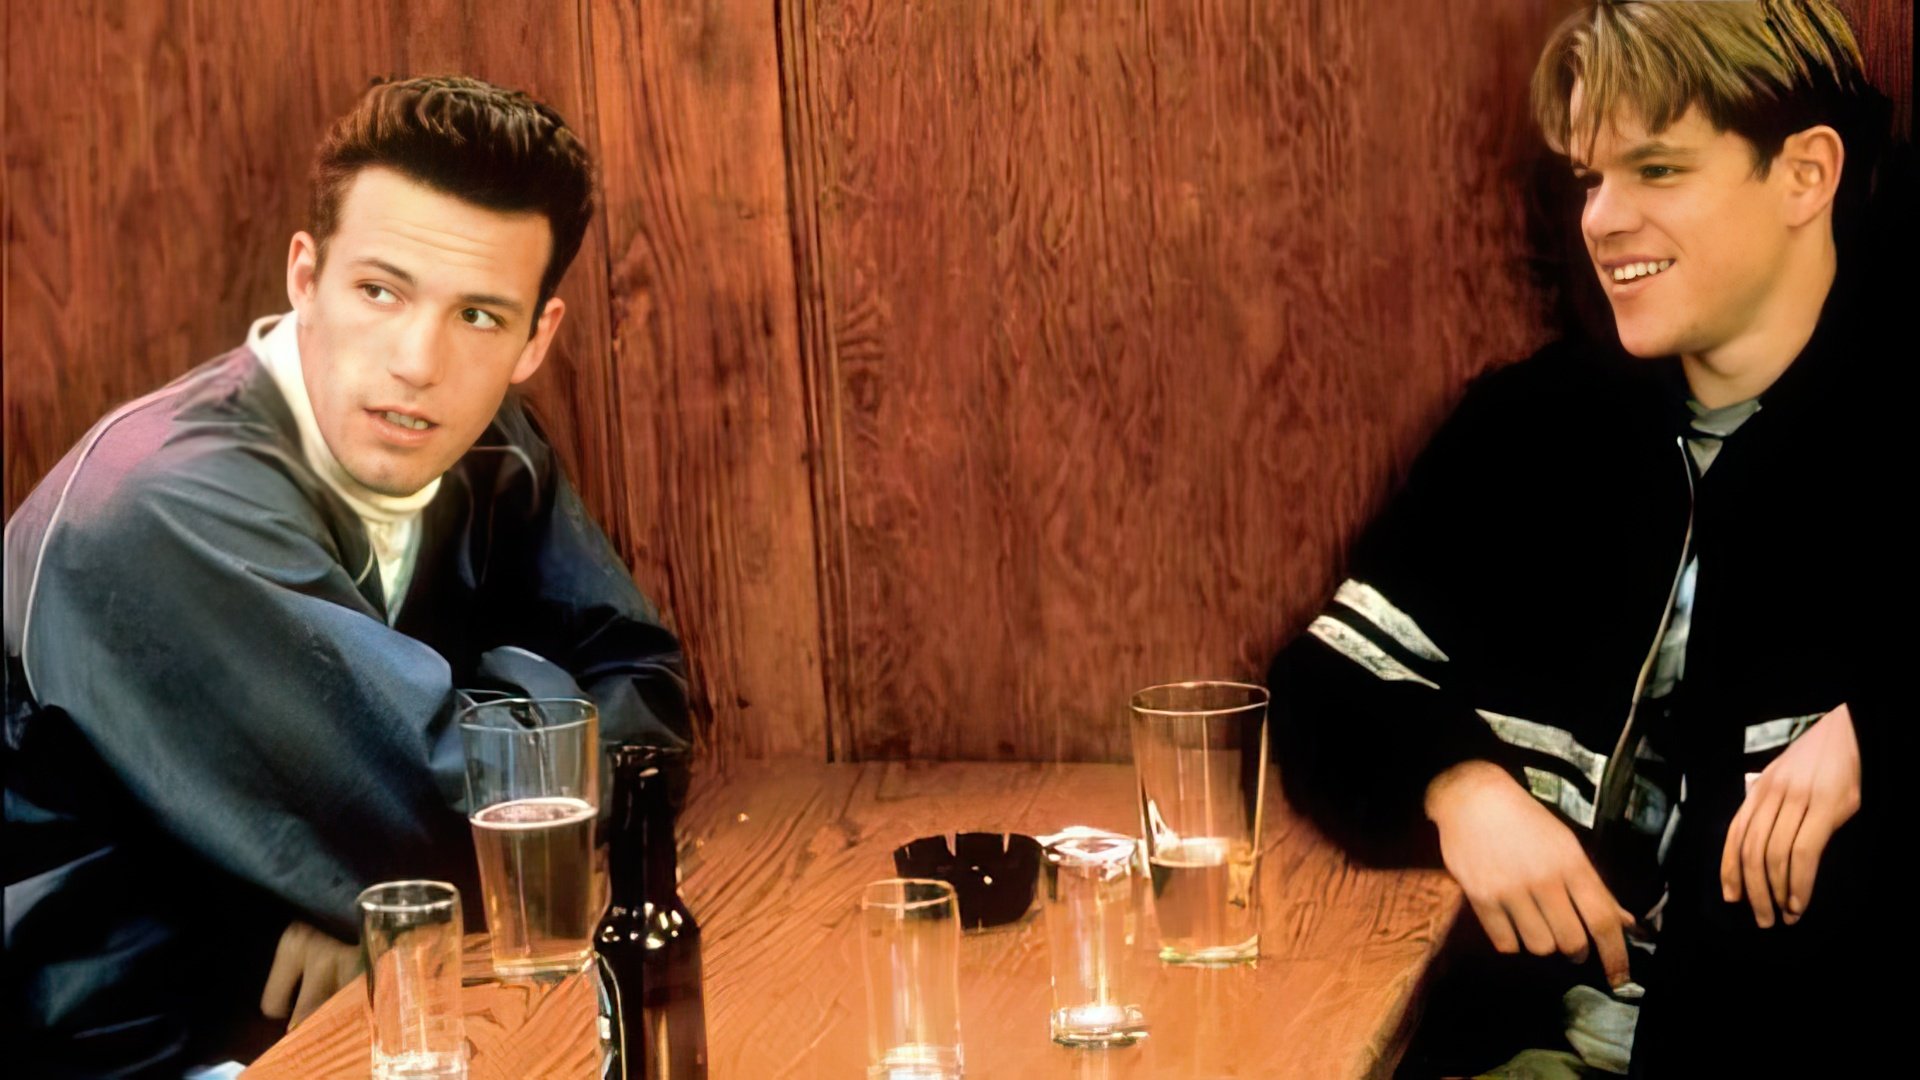 «Good Will Hunting» was based on a script that Affleck and Damon wrote together